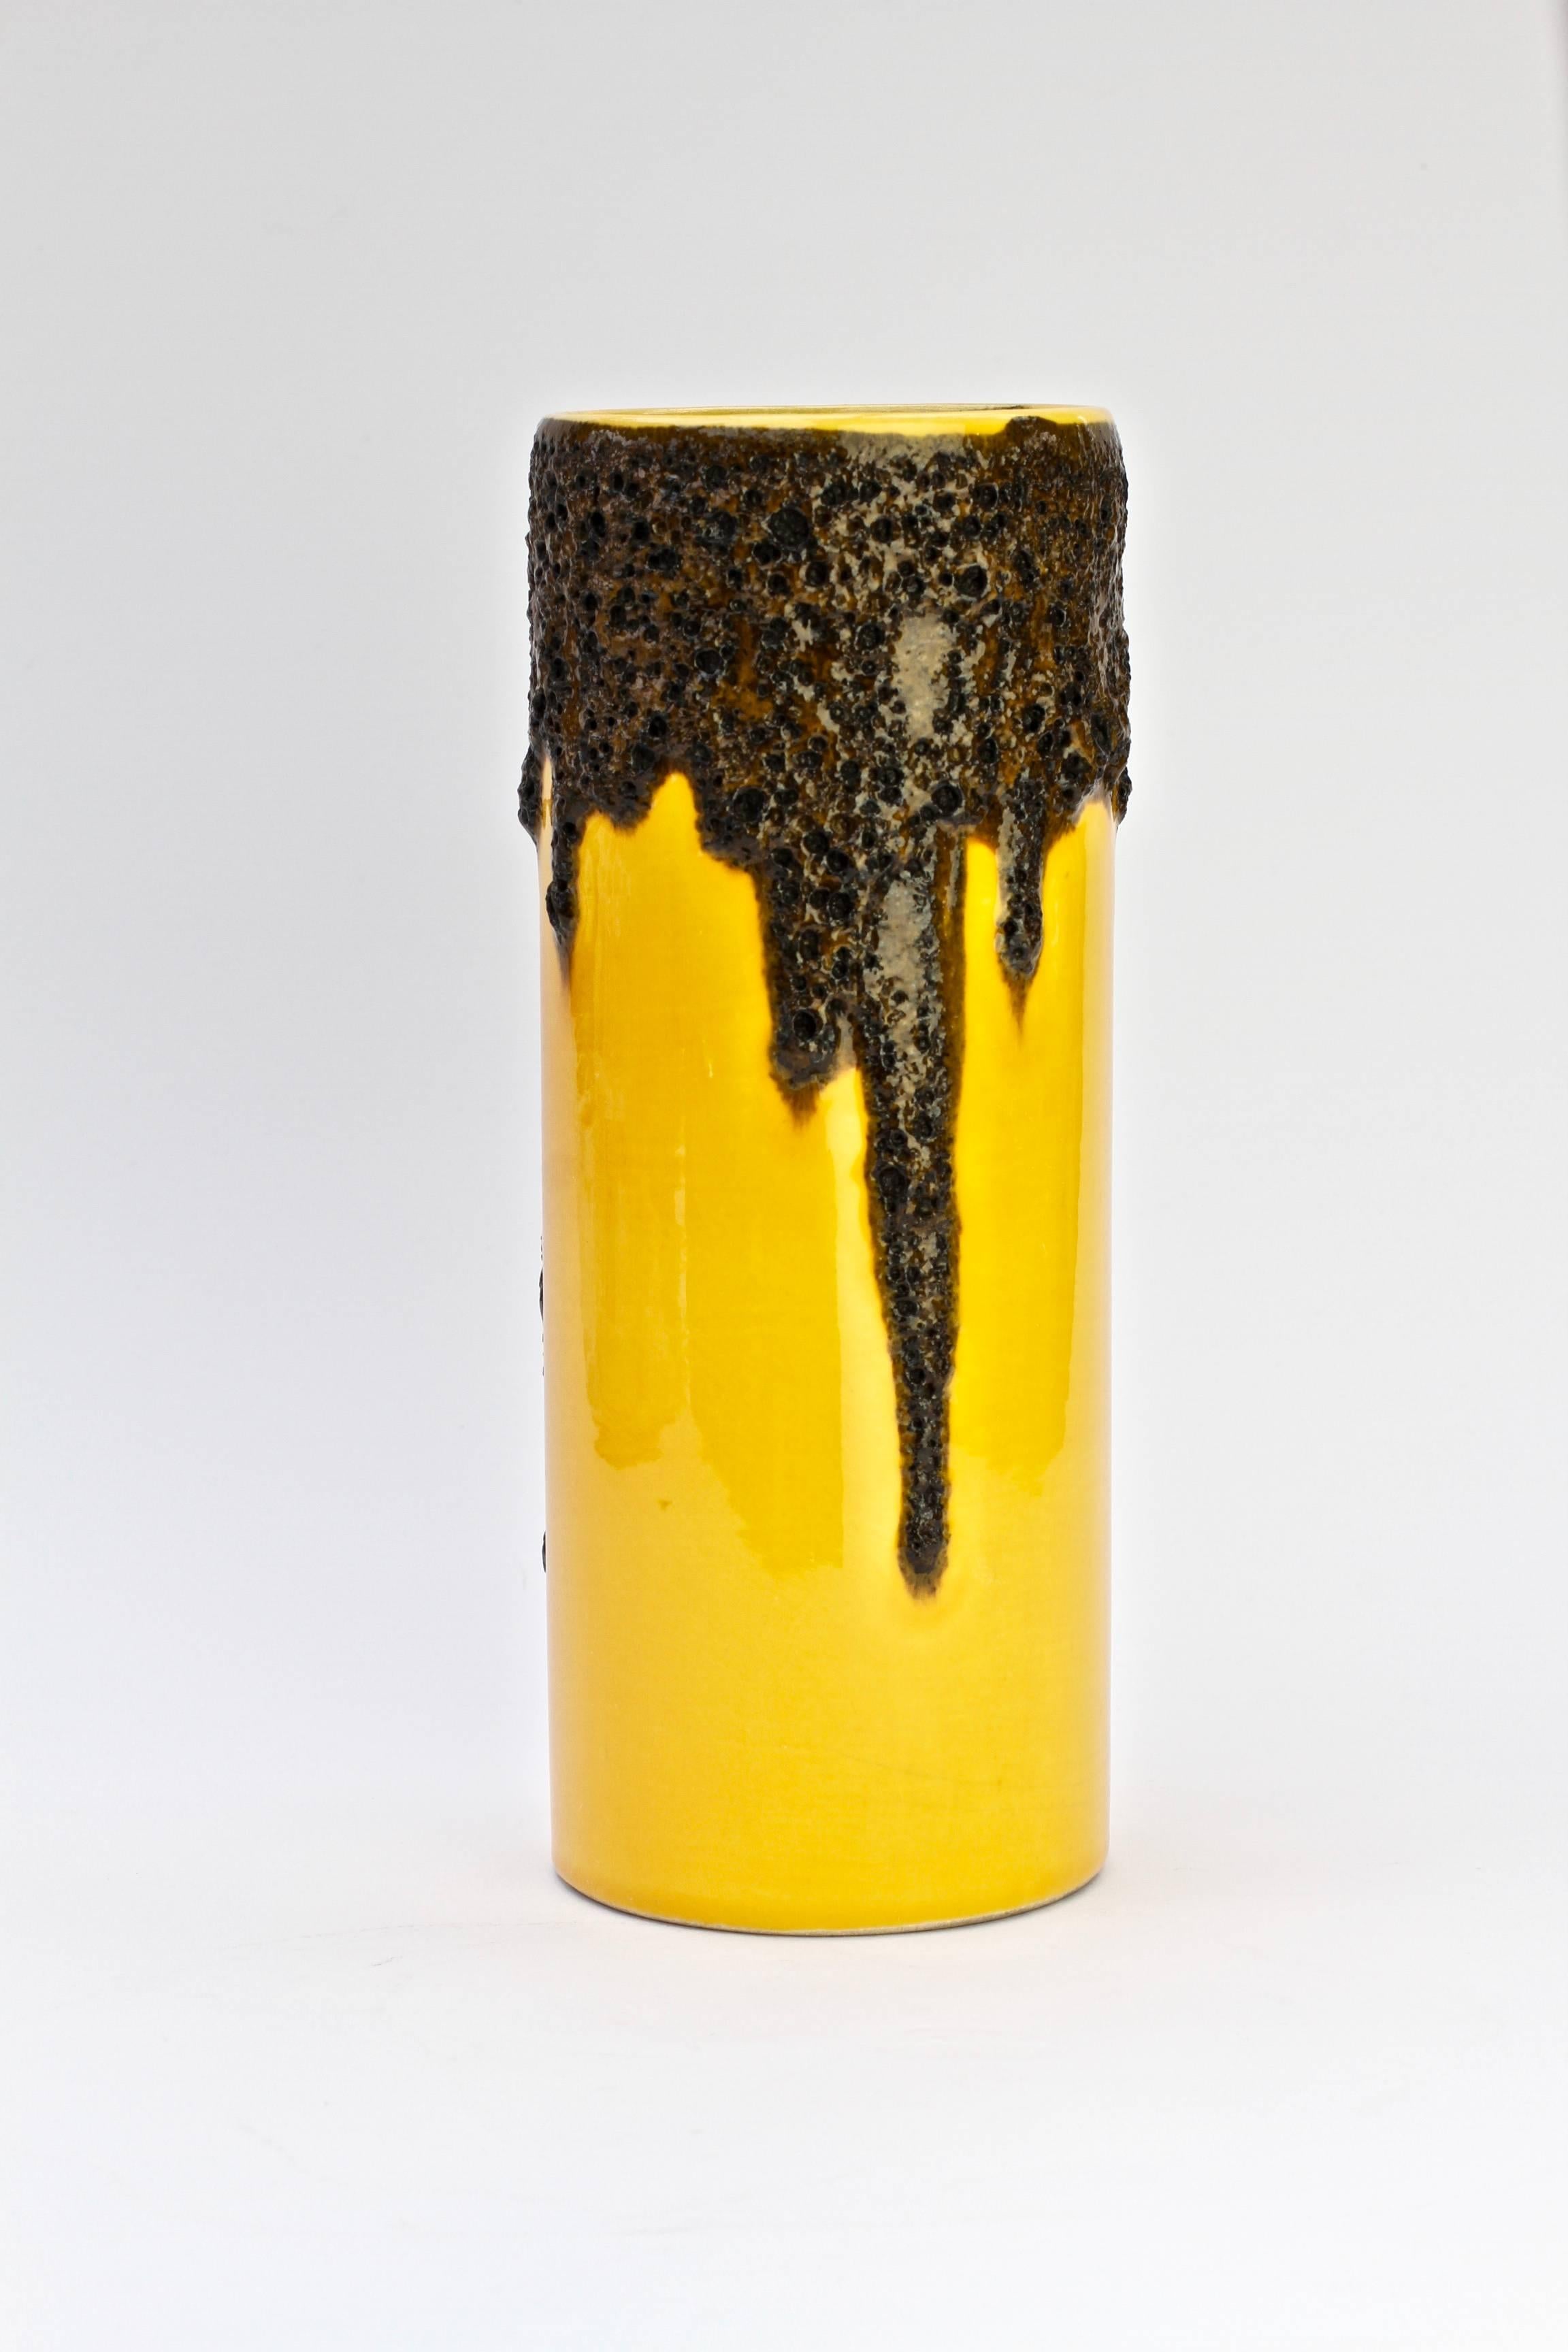 A tall, cylindrical, beautiful and bright vivid yellow vase by Fohr Pottery, circa 1970. The bright yellow looks wonderful against the textured black fat lava drip glaze. 

A wonderfully fun vintage collectible to brighten up your home